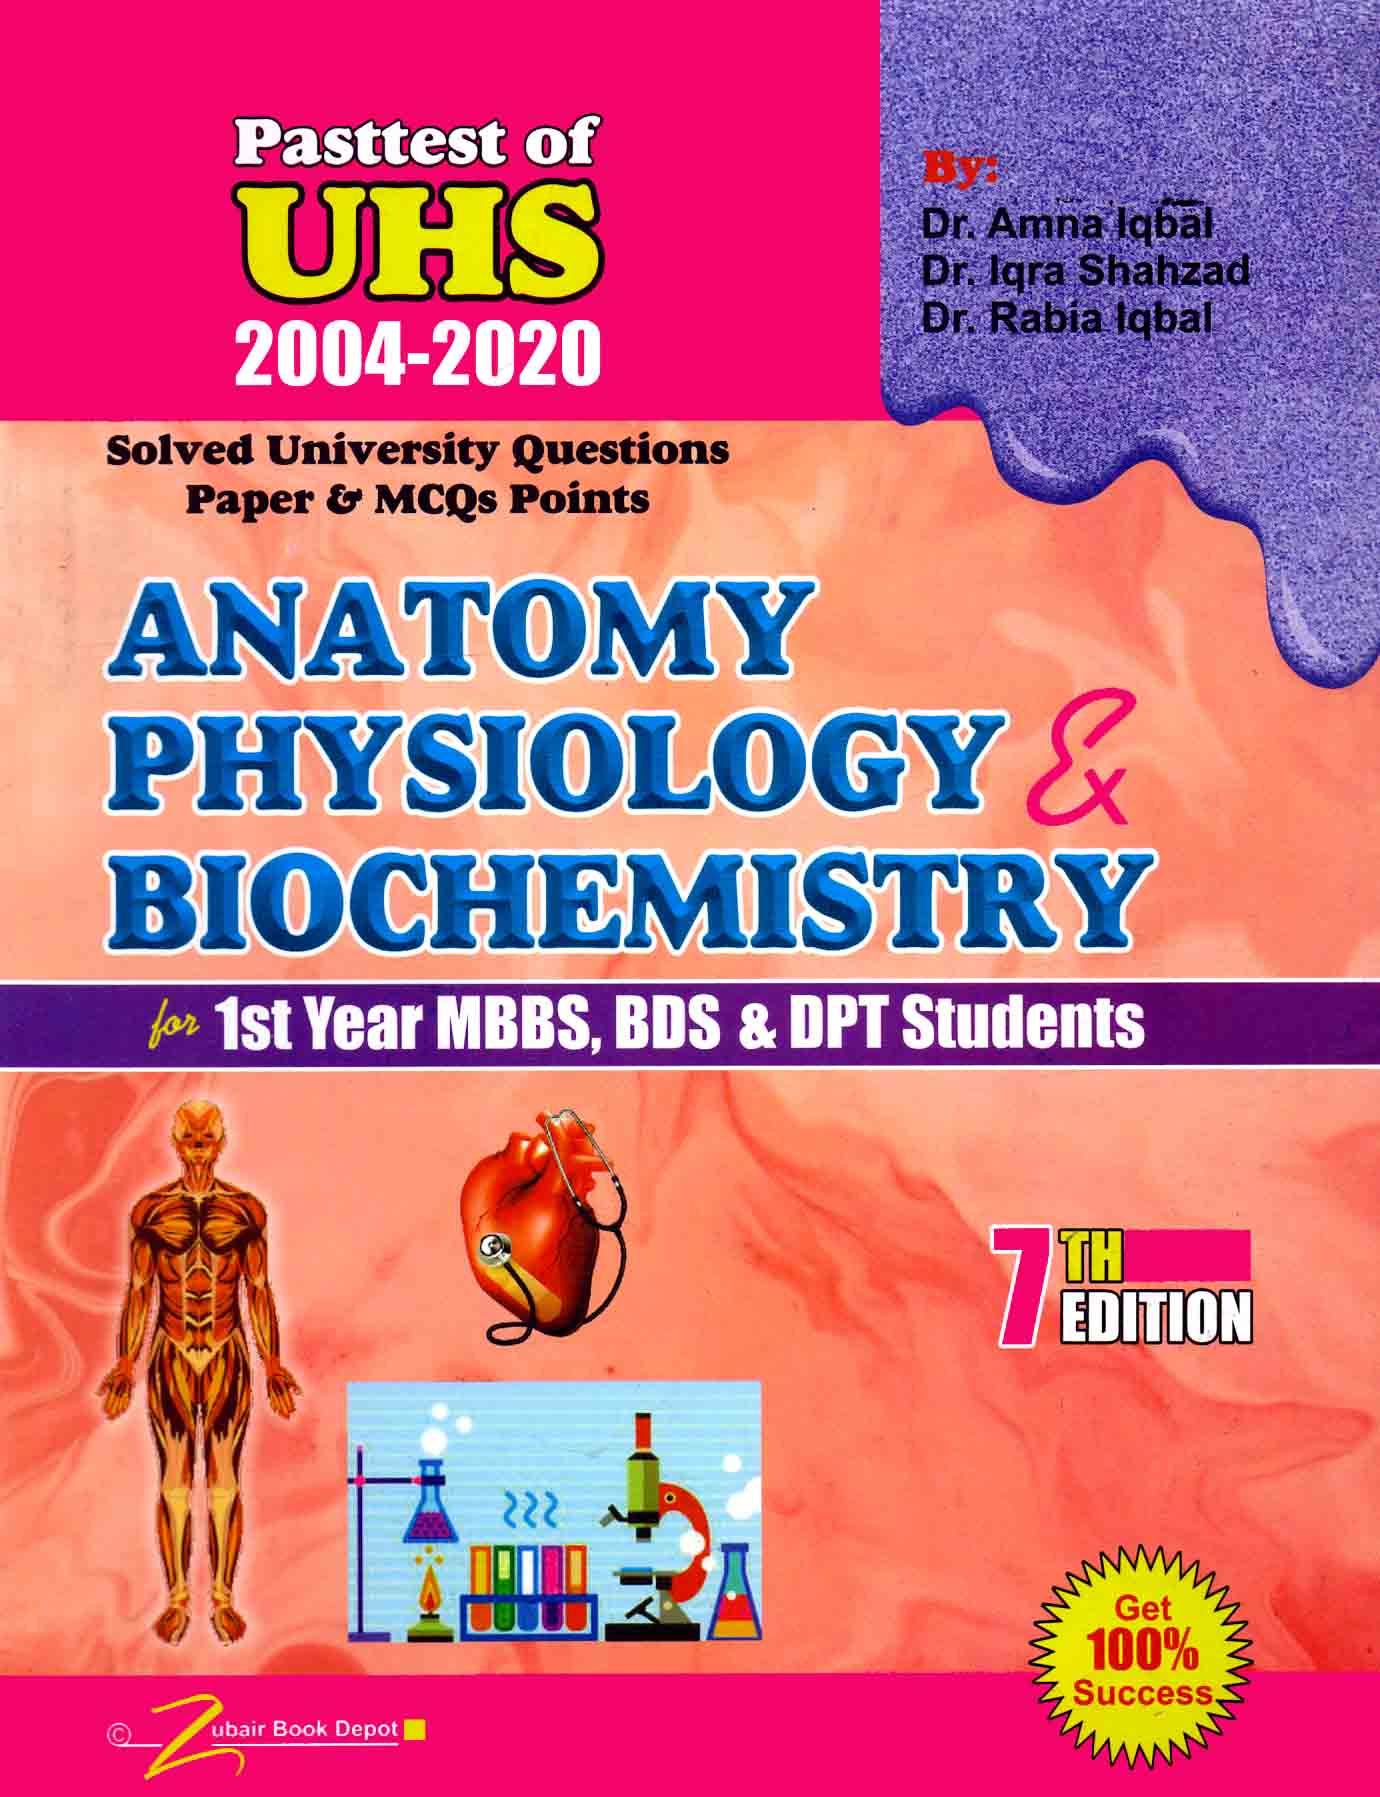 research topics for 1st year mbbs students